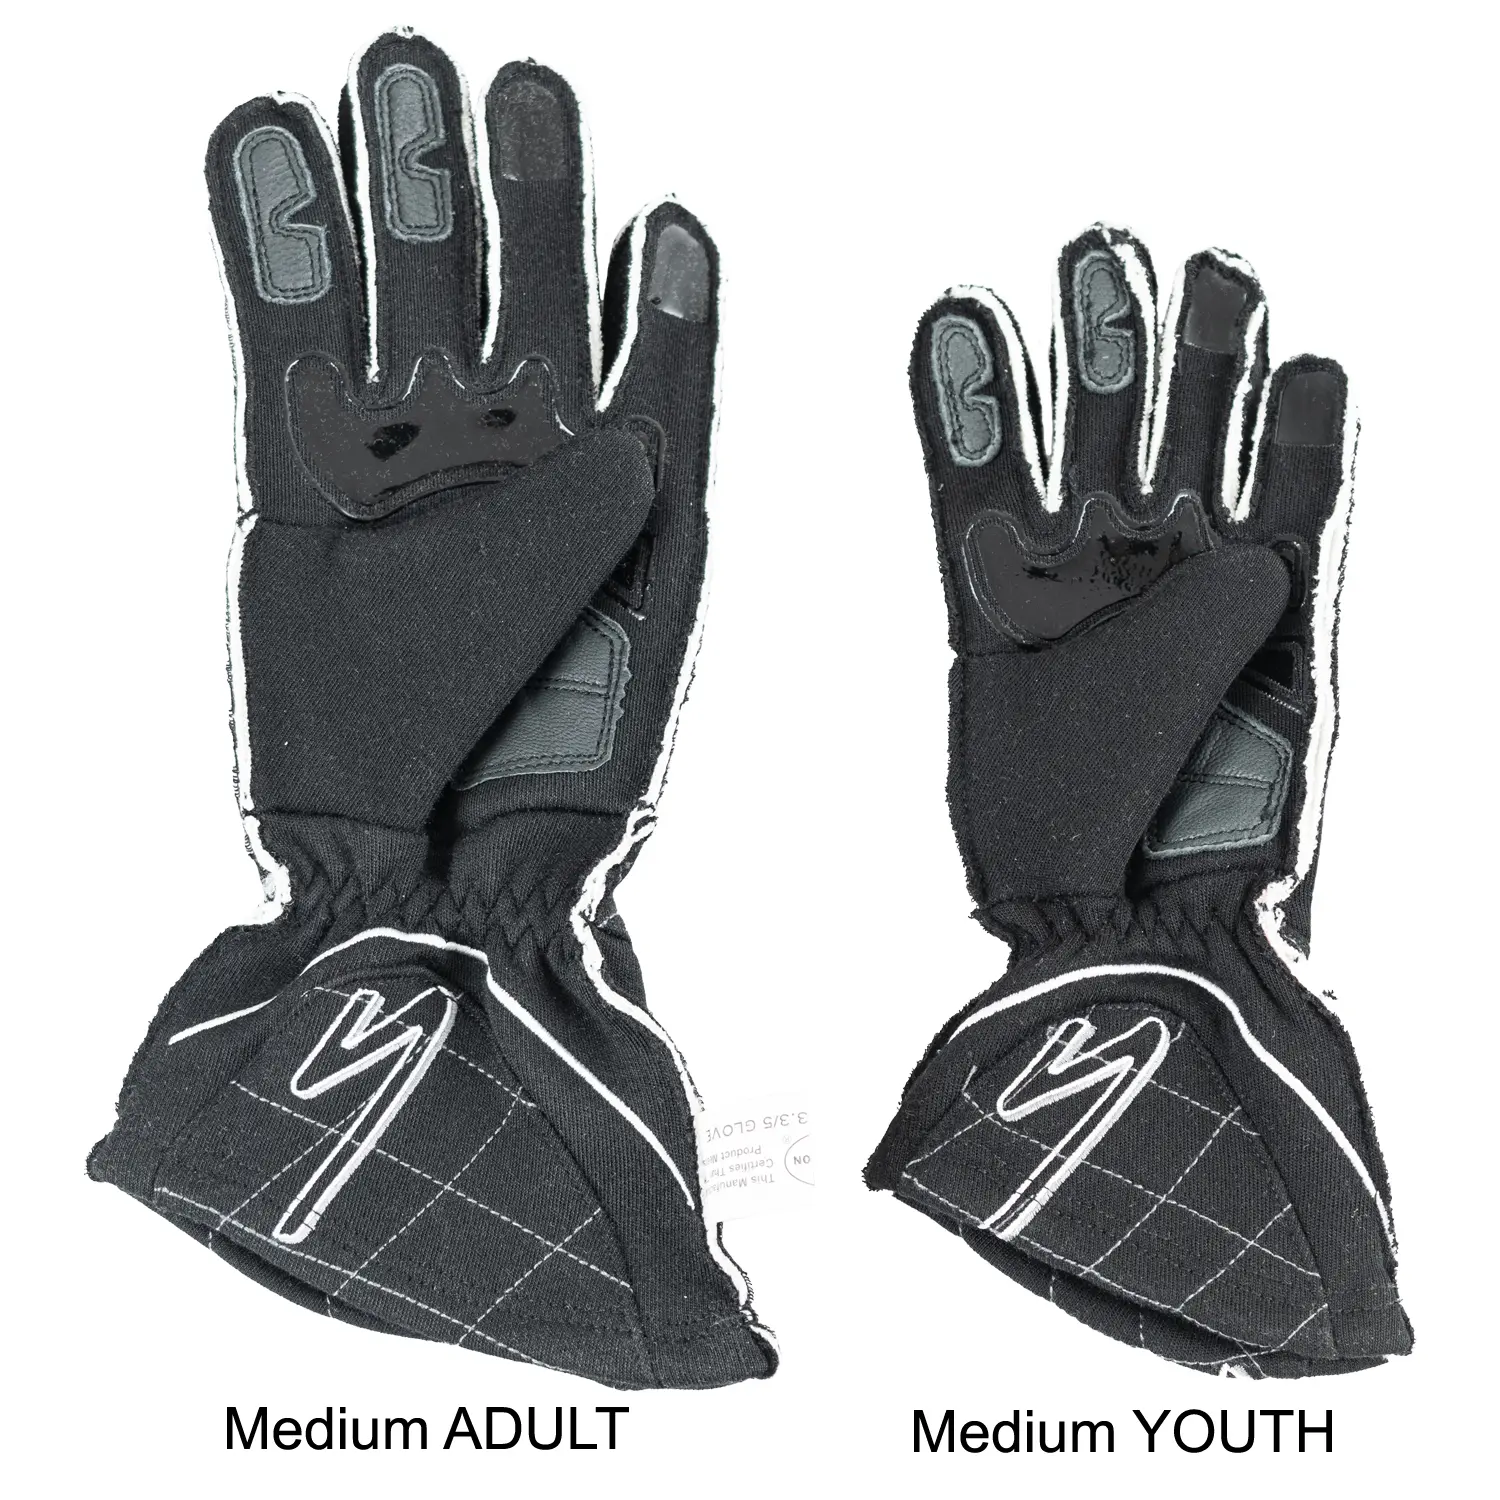 ZR-50 Youth Race Gloves